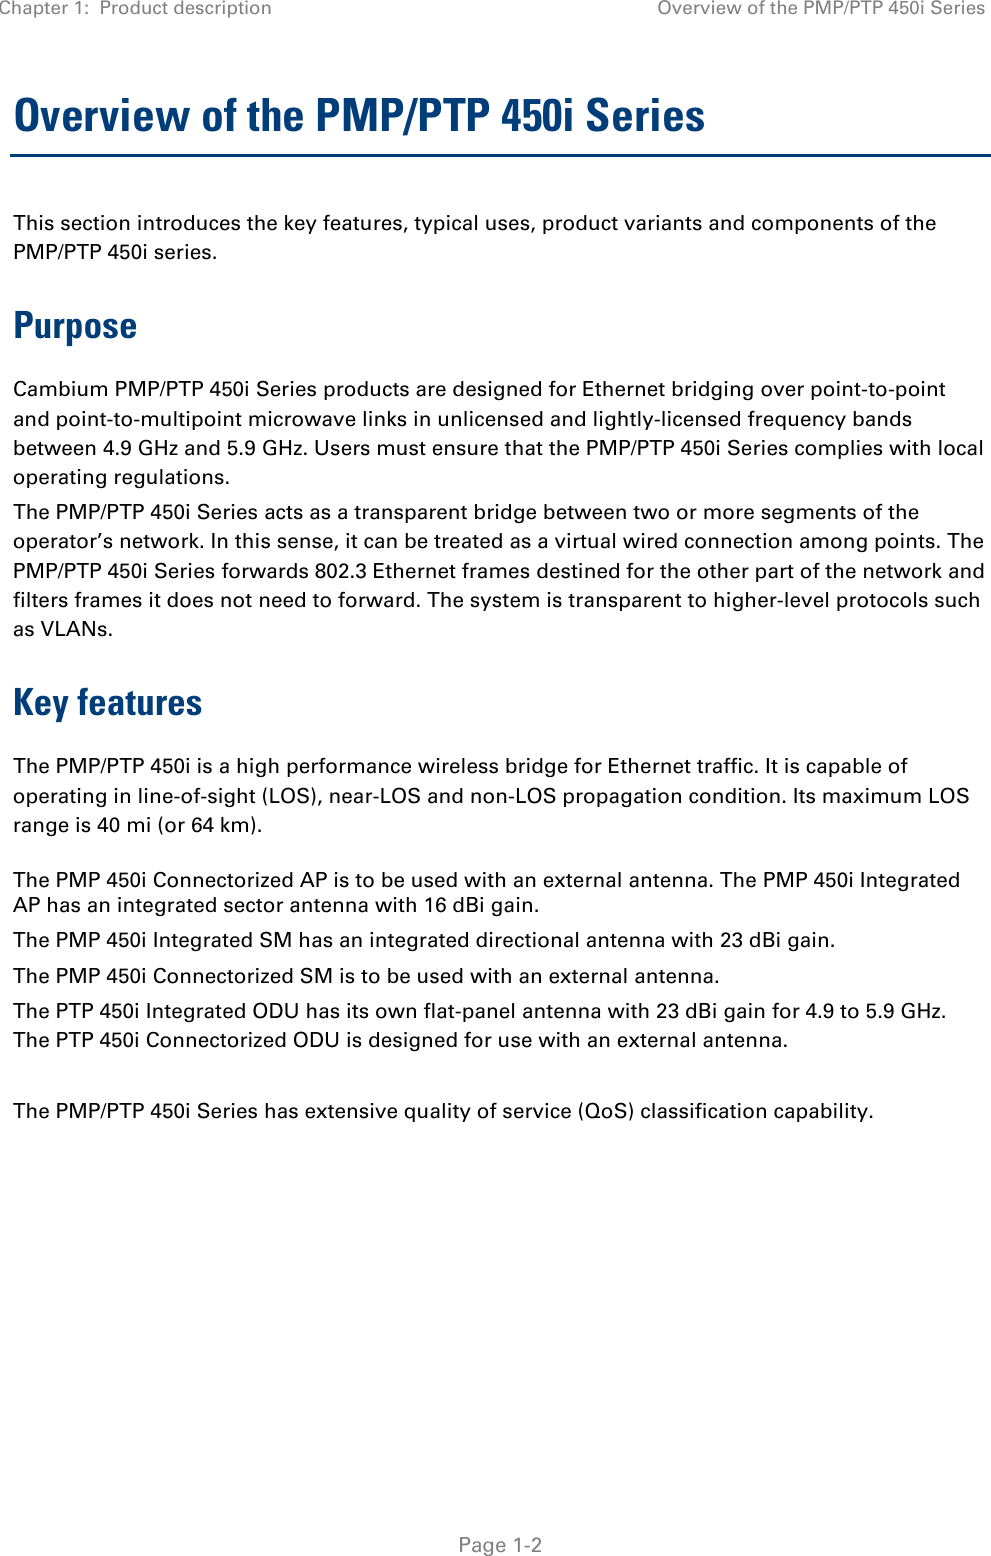 Chapter 1:  Product description Overview of the PMP/PTP 450i Series   Page 1-2 Overview of the PMP/PTP 450i Series This section introduces the key features, typical uses, product variants and components of the PMP/PTP 450i series. Purpose Cambium PMP/PTP 450i Series products are designed for Ethernet bridging over point-to-point and point-to-multipoint microwave links in unlicensed and lightly-licensed frequency bands between 4.9 GHz and 5.9 GHz. Users must ensure that the PMP/PTP 450i Series complies with local operating regulations. The PMP/PTP 450i Series acts as a transparent bridge between two or more segments of the operator’s network. In this sense, it can be treated as a virtual wired connection among points. The PMP/PTP 450i Series forwards 802.3 Ethernet frames destined for the other part of the network and filters frames it does not need to forward. The system is transparent to higher-level protocols such as VLANs. Key features The PMP/PTP 450i is a high performance wireless bridge for Ethernet traffic. It is capable of operating in line-of-sight (LOS), near-LOS and non-LOS propagation condition. Its maximum LOS range is 40 mi (or 64 km).   The PMP 450i Connectorized AP is to be used with an external antenna. The PMP 450i Integrated AP has an integrated sector antenna with 16 dBi gain. The PMP 450i Integrated SM has an integrated directional antenna with 23 dBi gain.  The PMP 450i Connectorized SM is to be used with an external antenna. The PTP 450i Integrated ODU has its own flat-panel antenna with 23 dBi gain for 4.9 to 5.9 GHz. The PTP 450i Connectorized ODU is designed for use with an external antenna.  The PMP/PTP 450i Series has extensive quality of service (QoS) classification capability.    